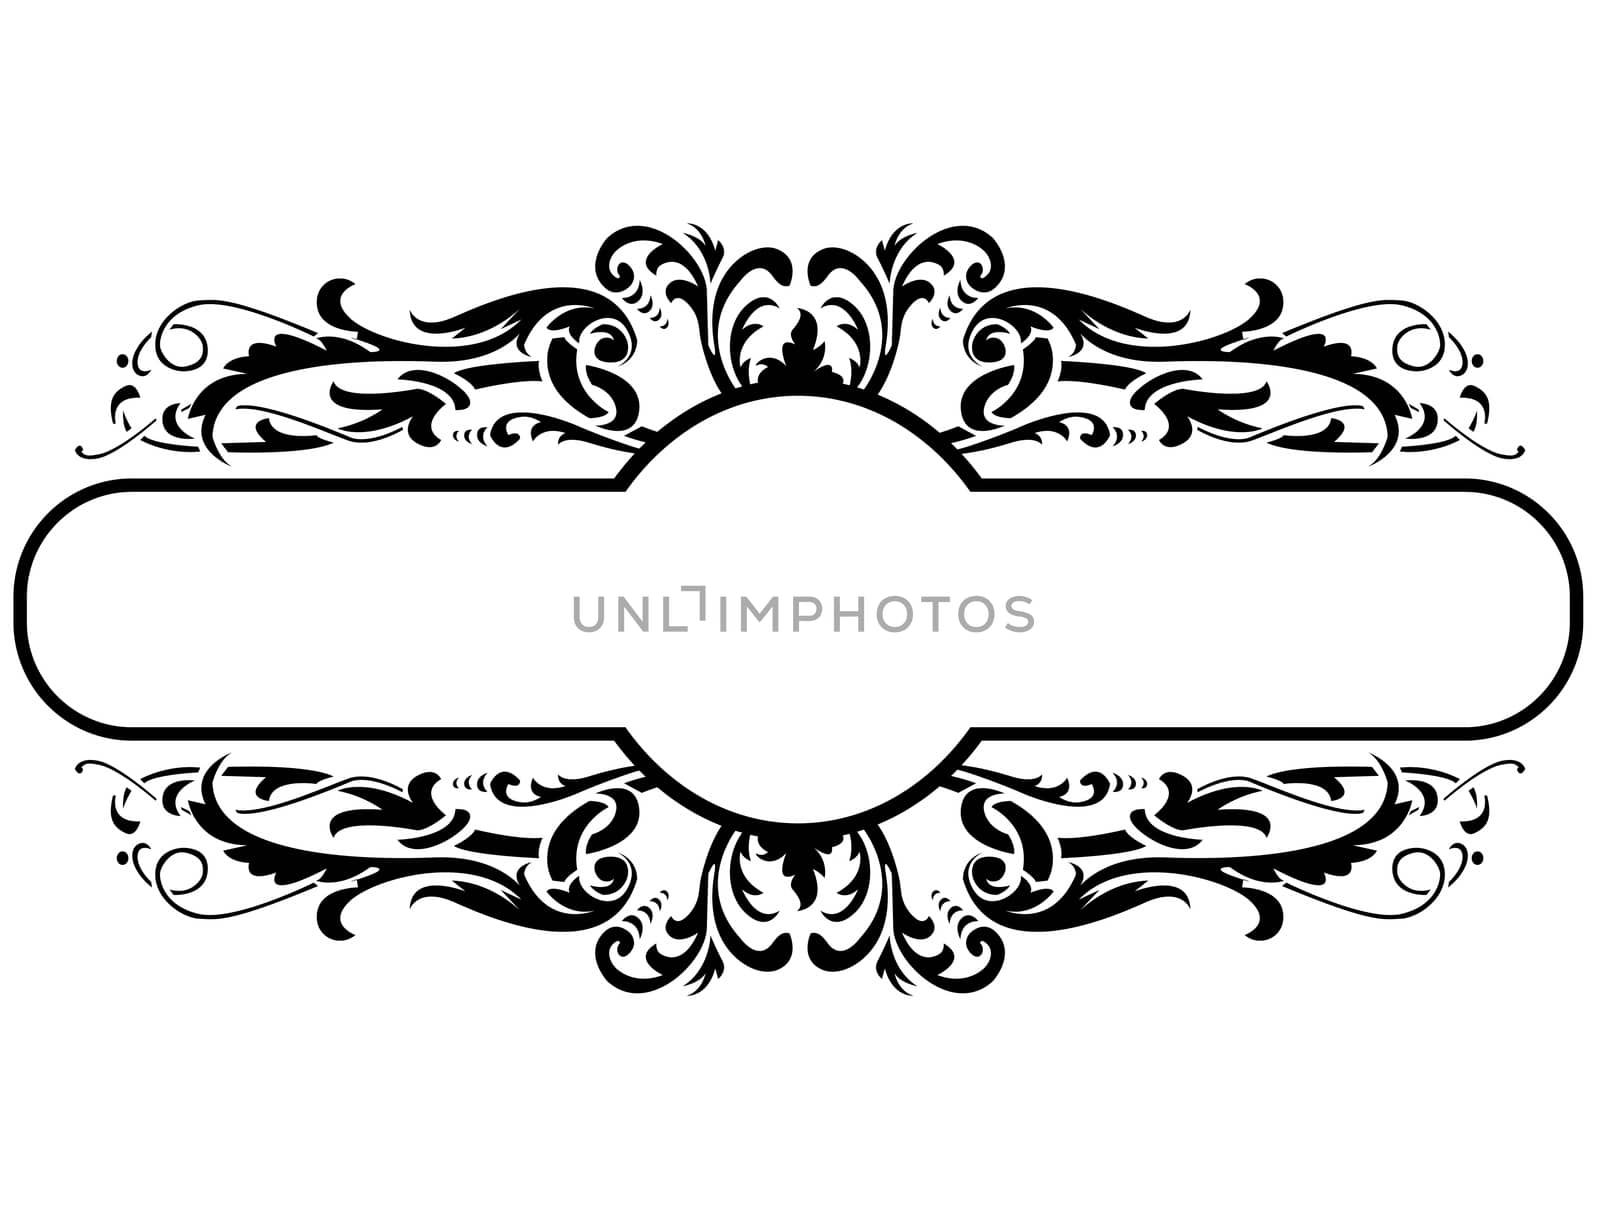 black frame with floral decoration, vector illustration by WaD